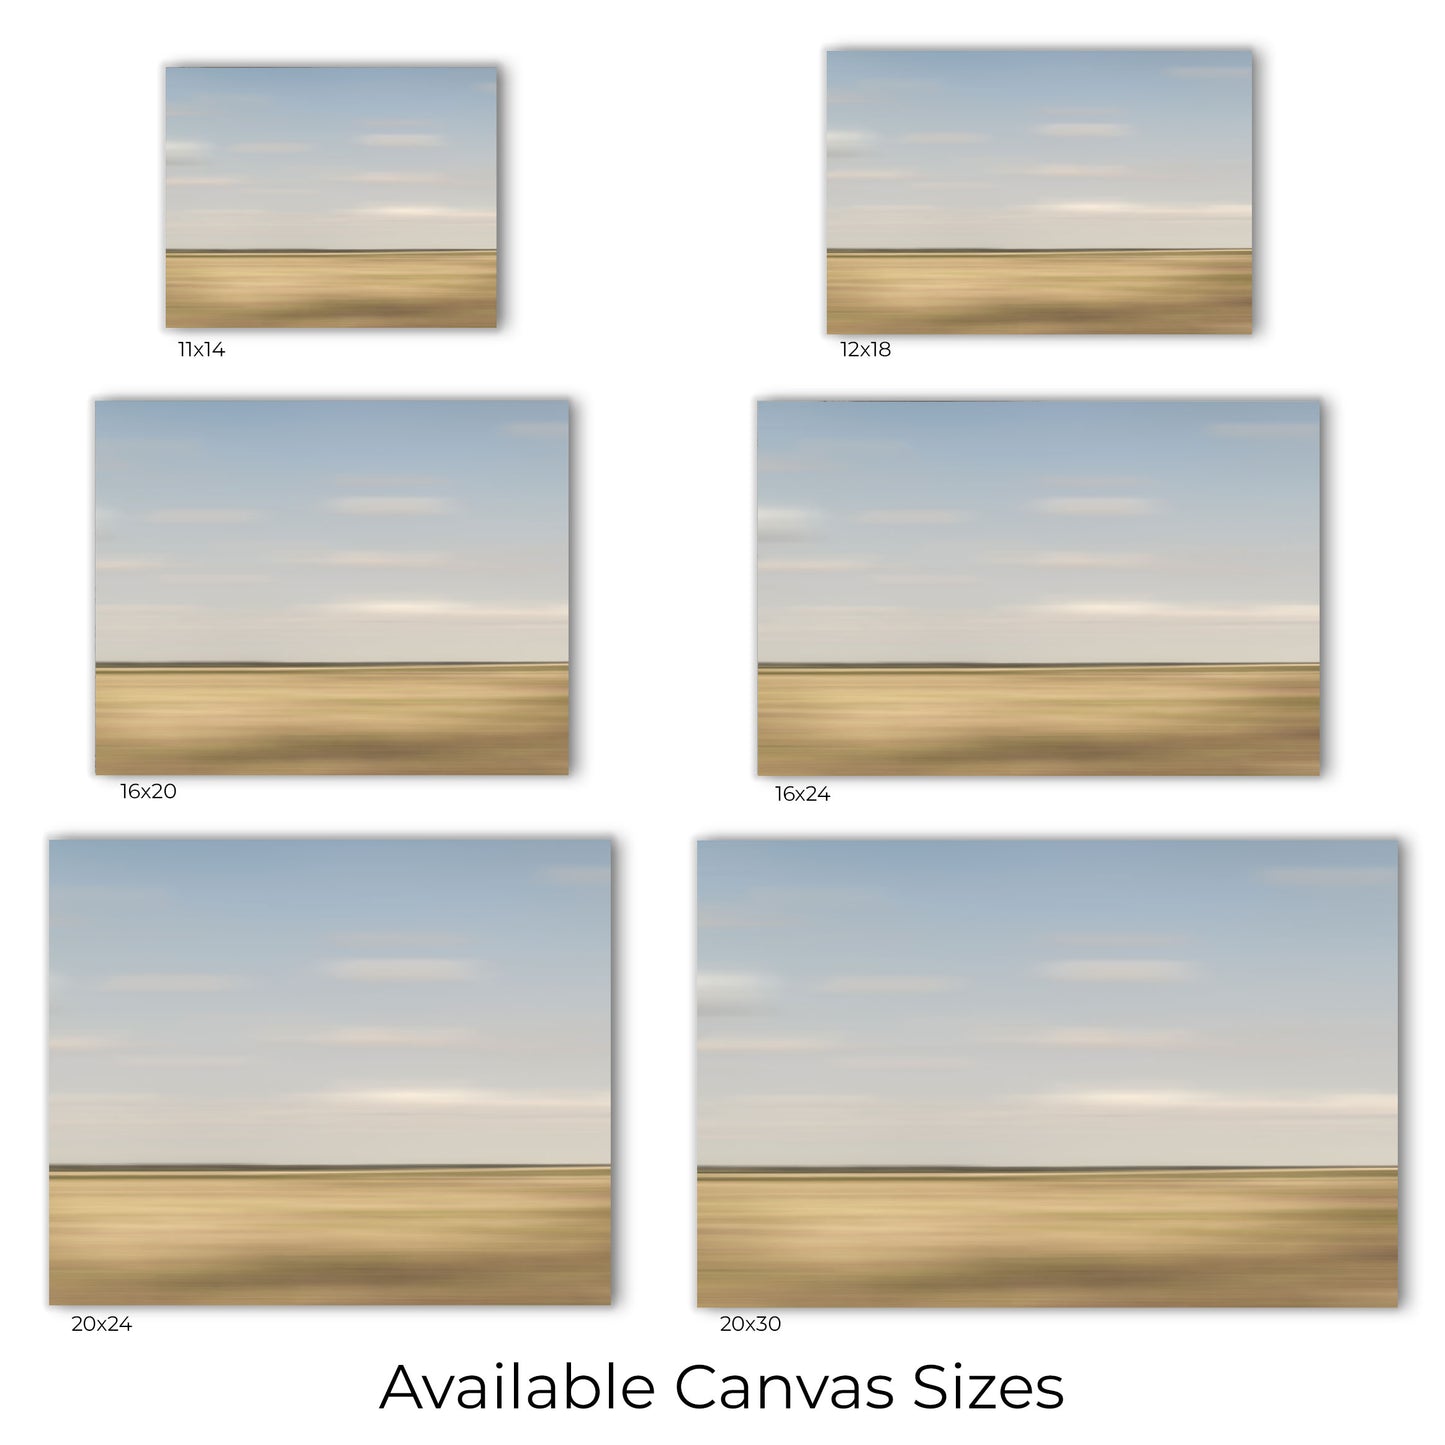 Visual representation of the Abstract Prairie canvas wall art print sizes available: 11x14, 12x18, 16x20, 16x24, 20x24 and 20x30.